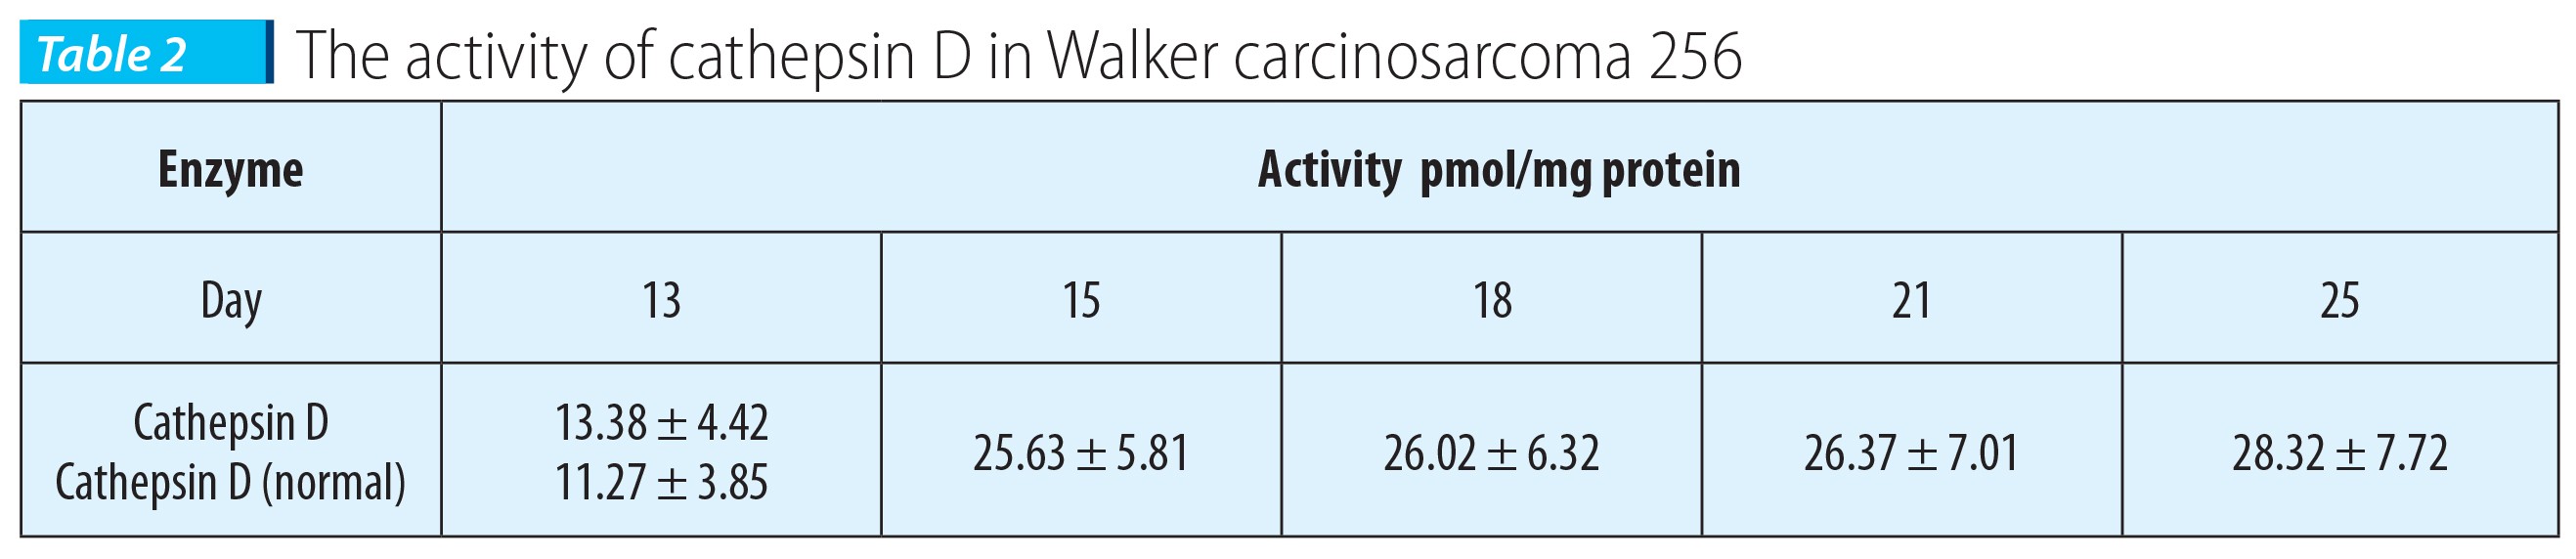 Tabelul 2; The activity of cathepsin D in Walker carcinosarcoma 256